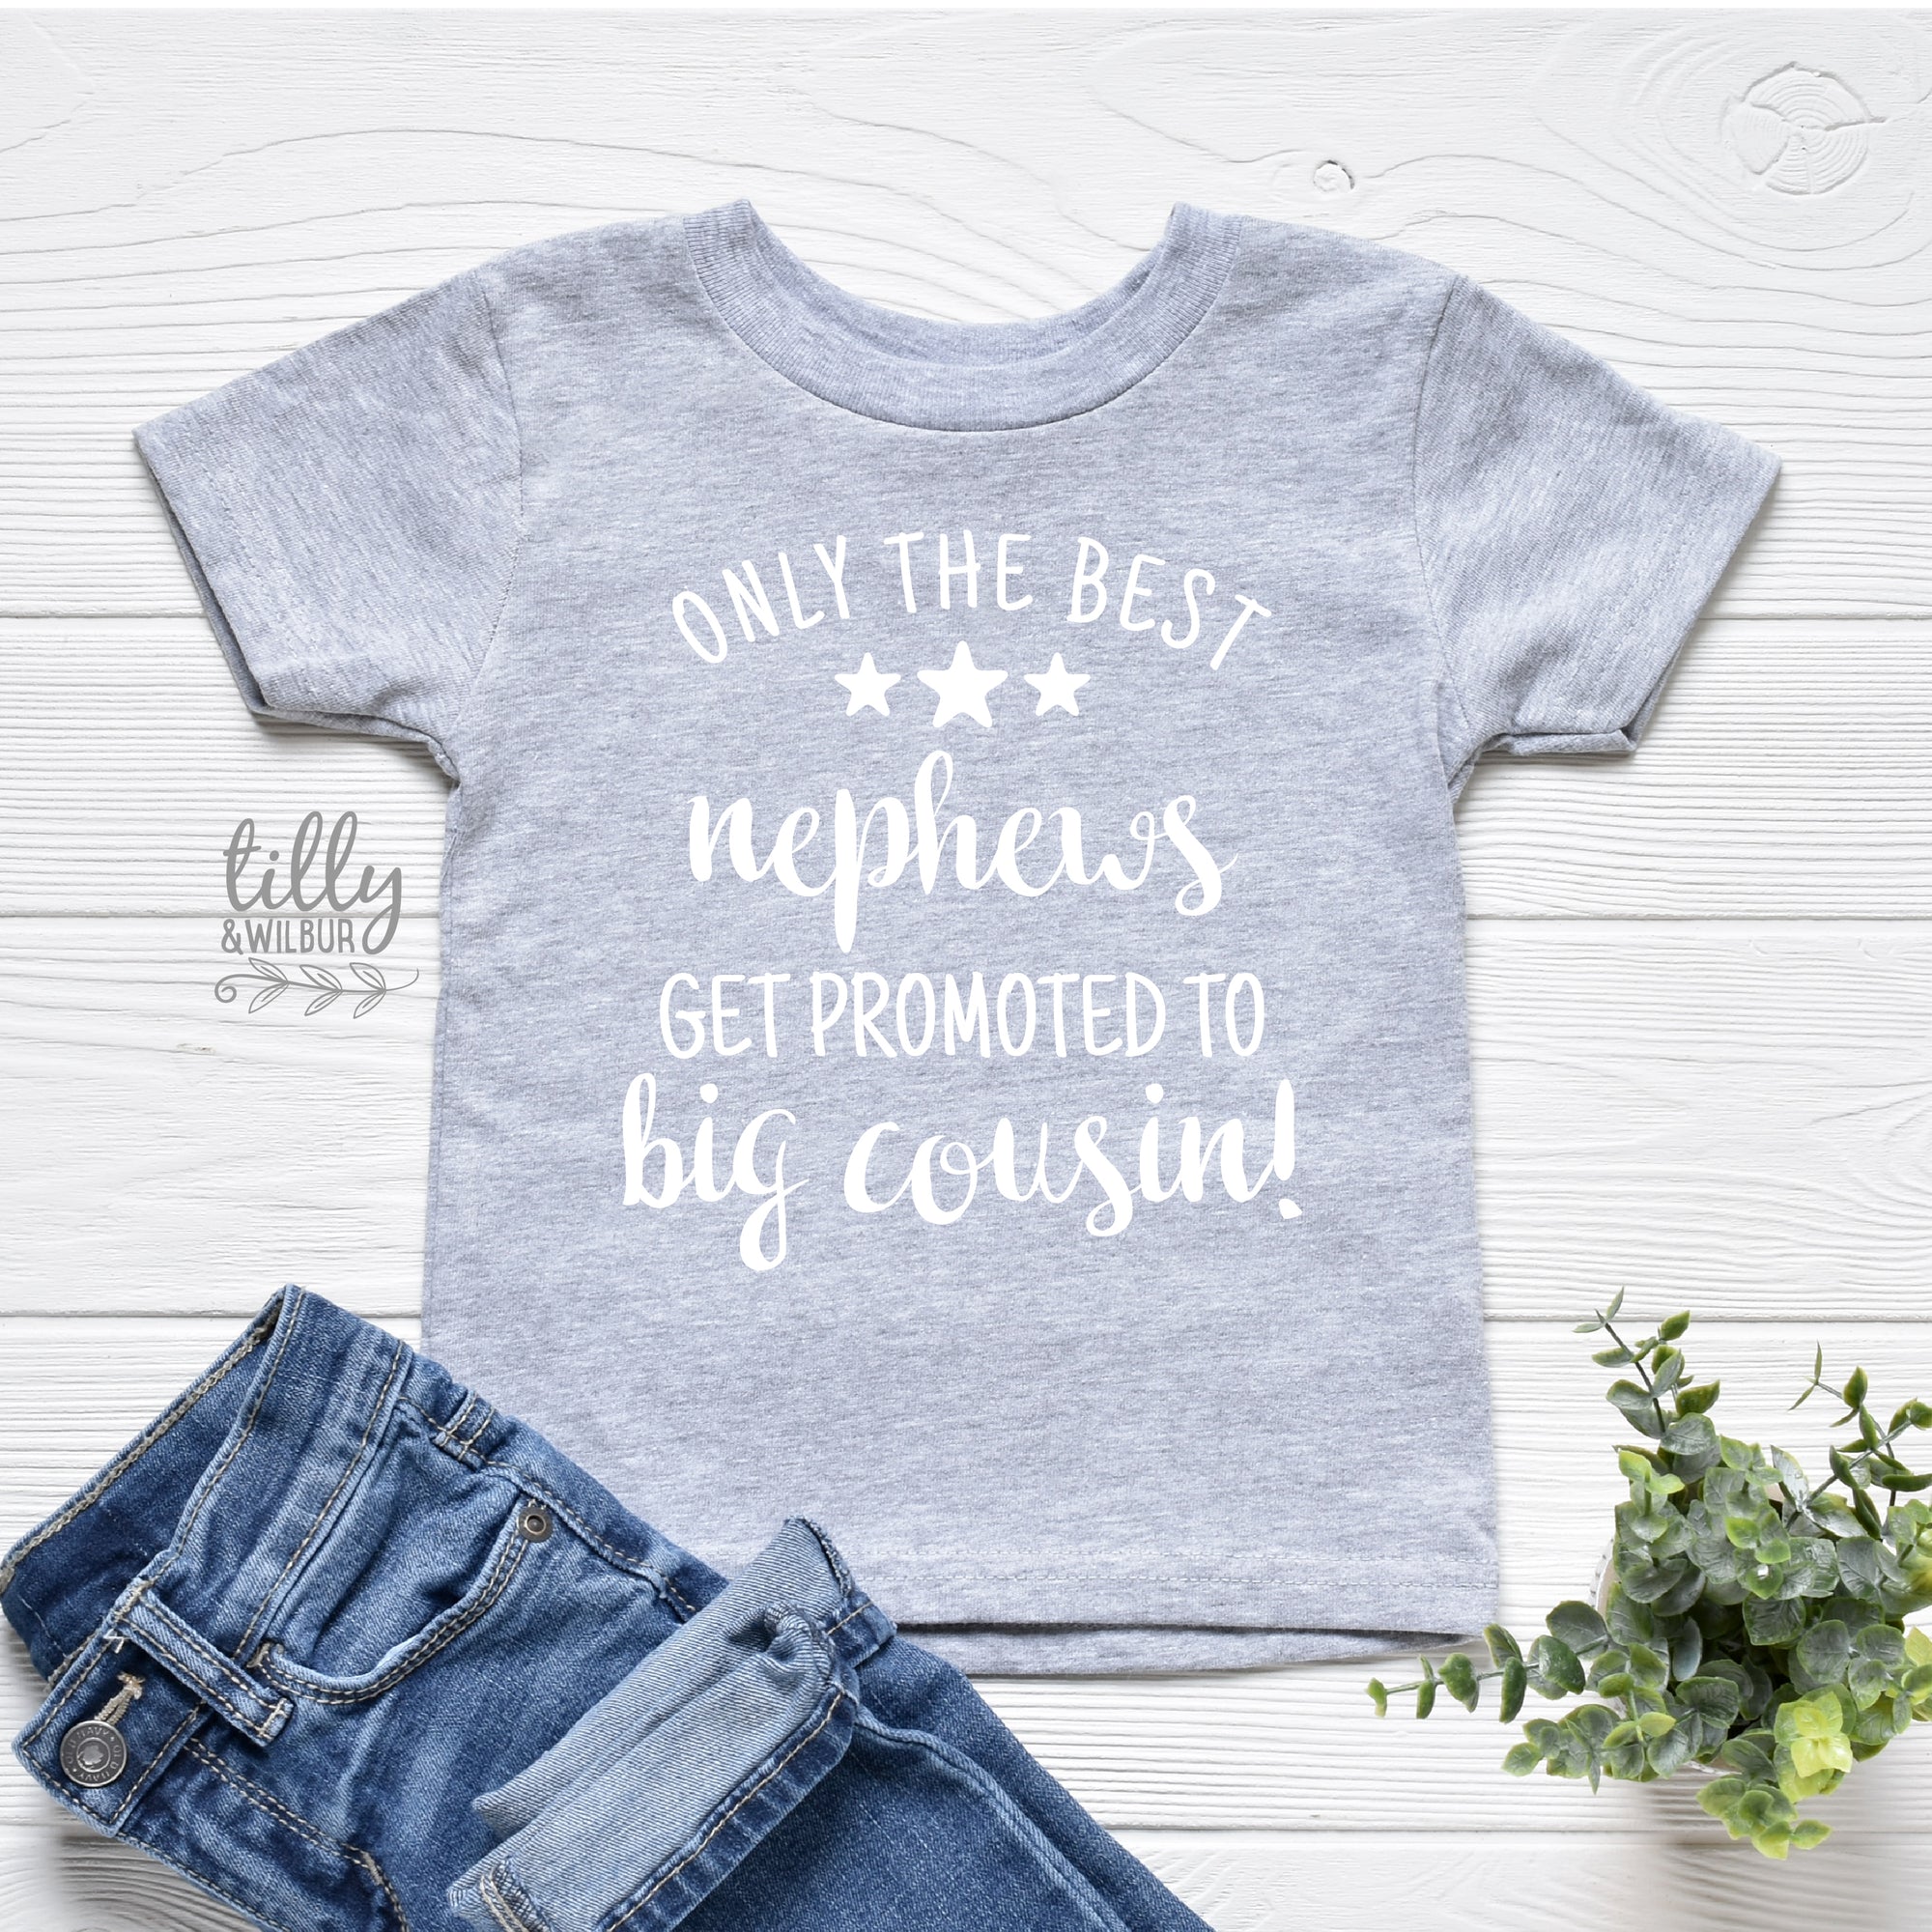 Only The Best Nephews Get Promoted To Big Cousin! Boys T-Shirt